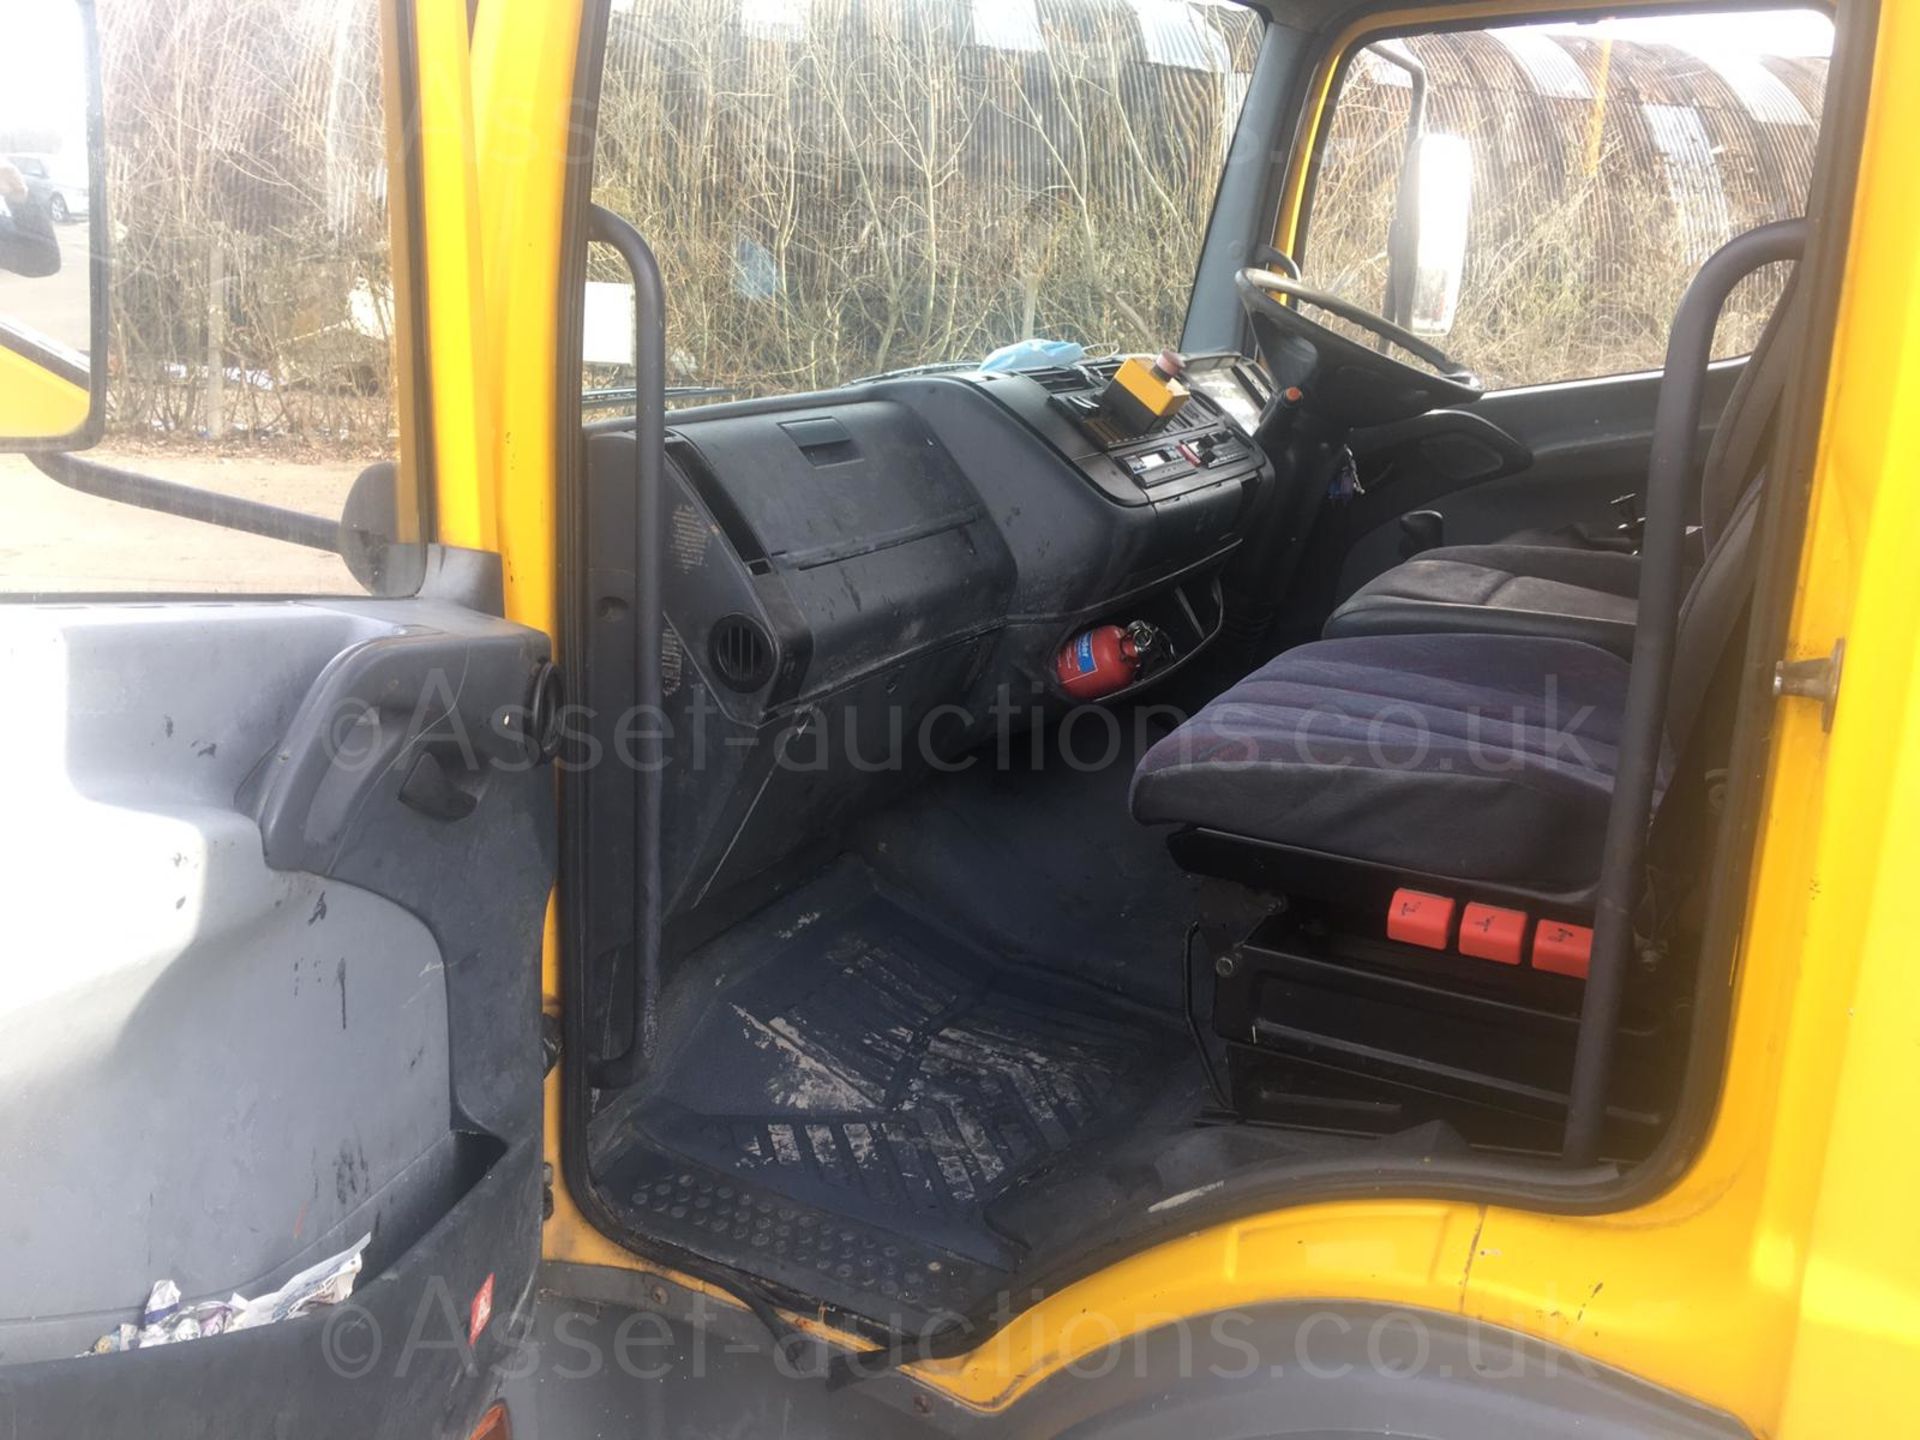 2004/54 REG MERCEDES ATEGO 1018 DAY YELLOW DROPSIDE LINE PAINTING LORRY 4.3L DIESEL ENGINE *NO VAT* - Image 27 of 62